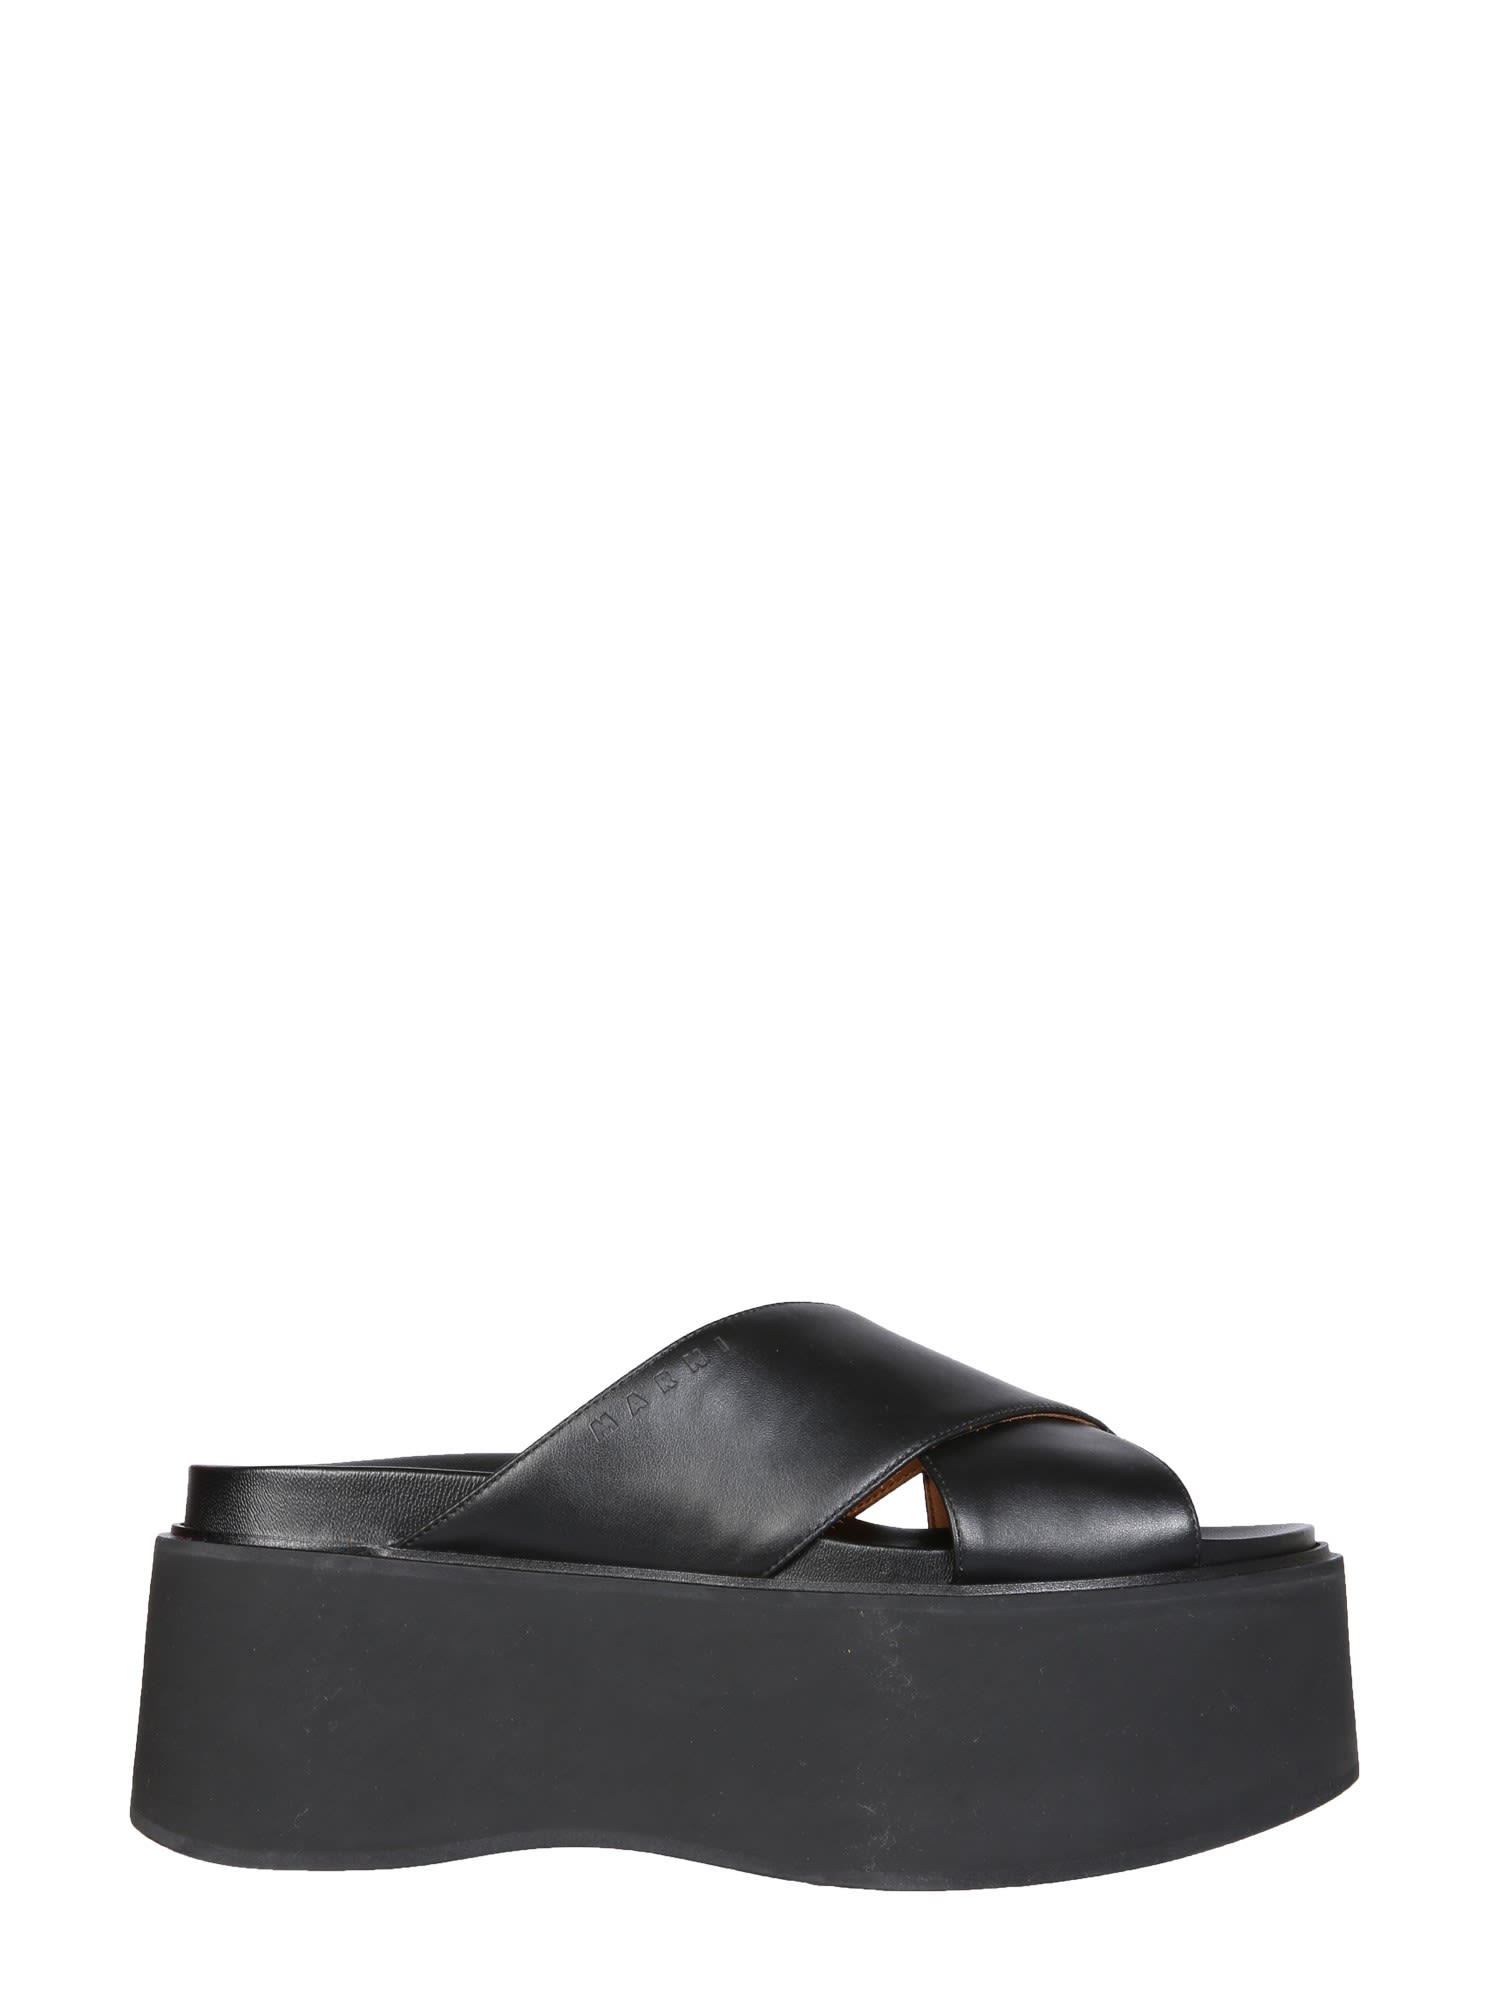 Buy Marni Crossed Wedges online, shop Marni shoes with free shipping